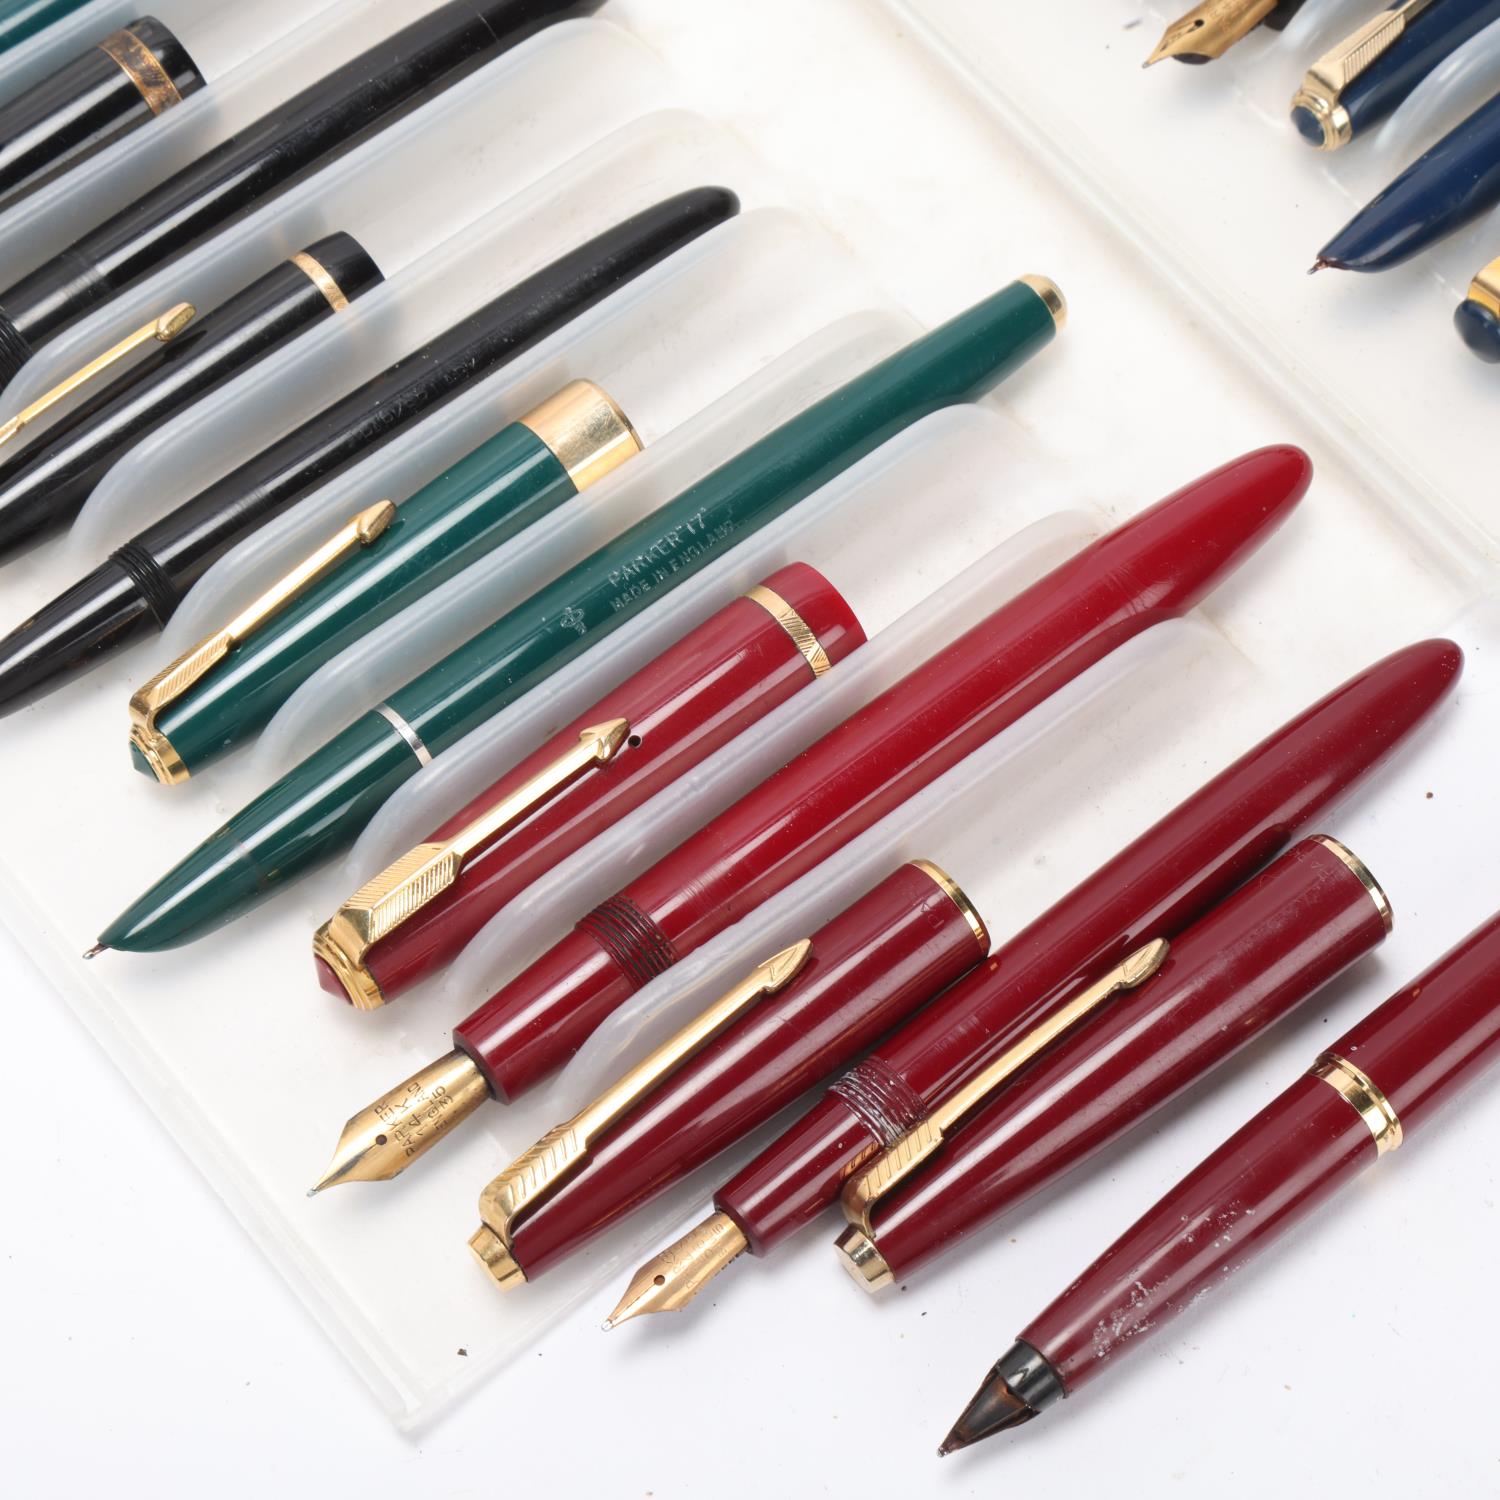 17 Parker fountain pens most 1950s-1970s', including models No17, Junior, Senior, Slimfold, Duofold, - Image 2 of 4